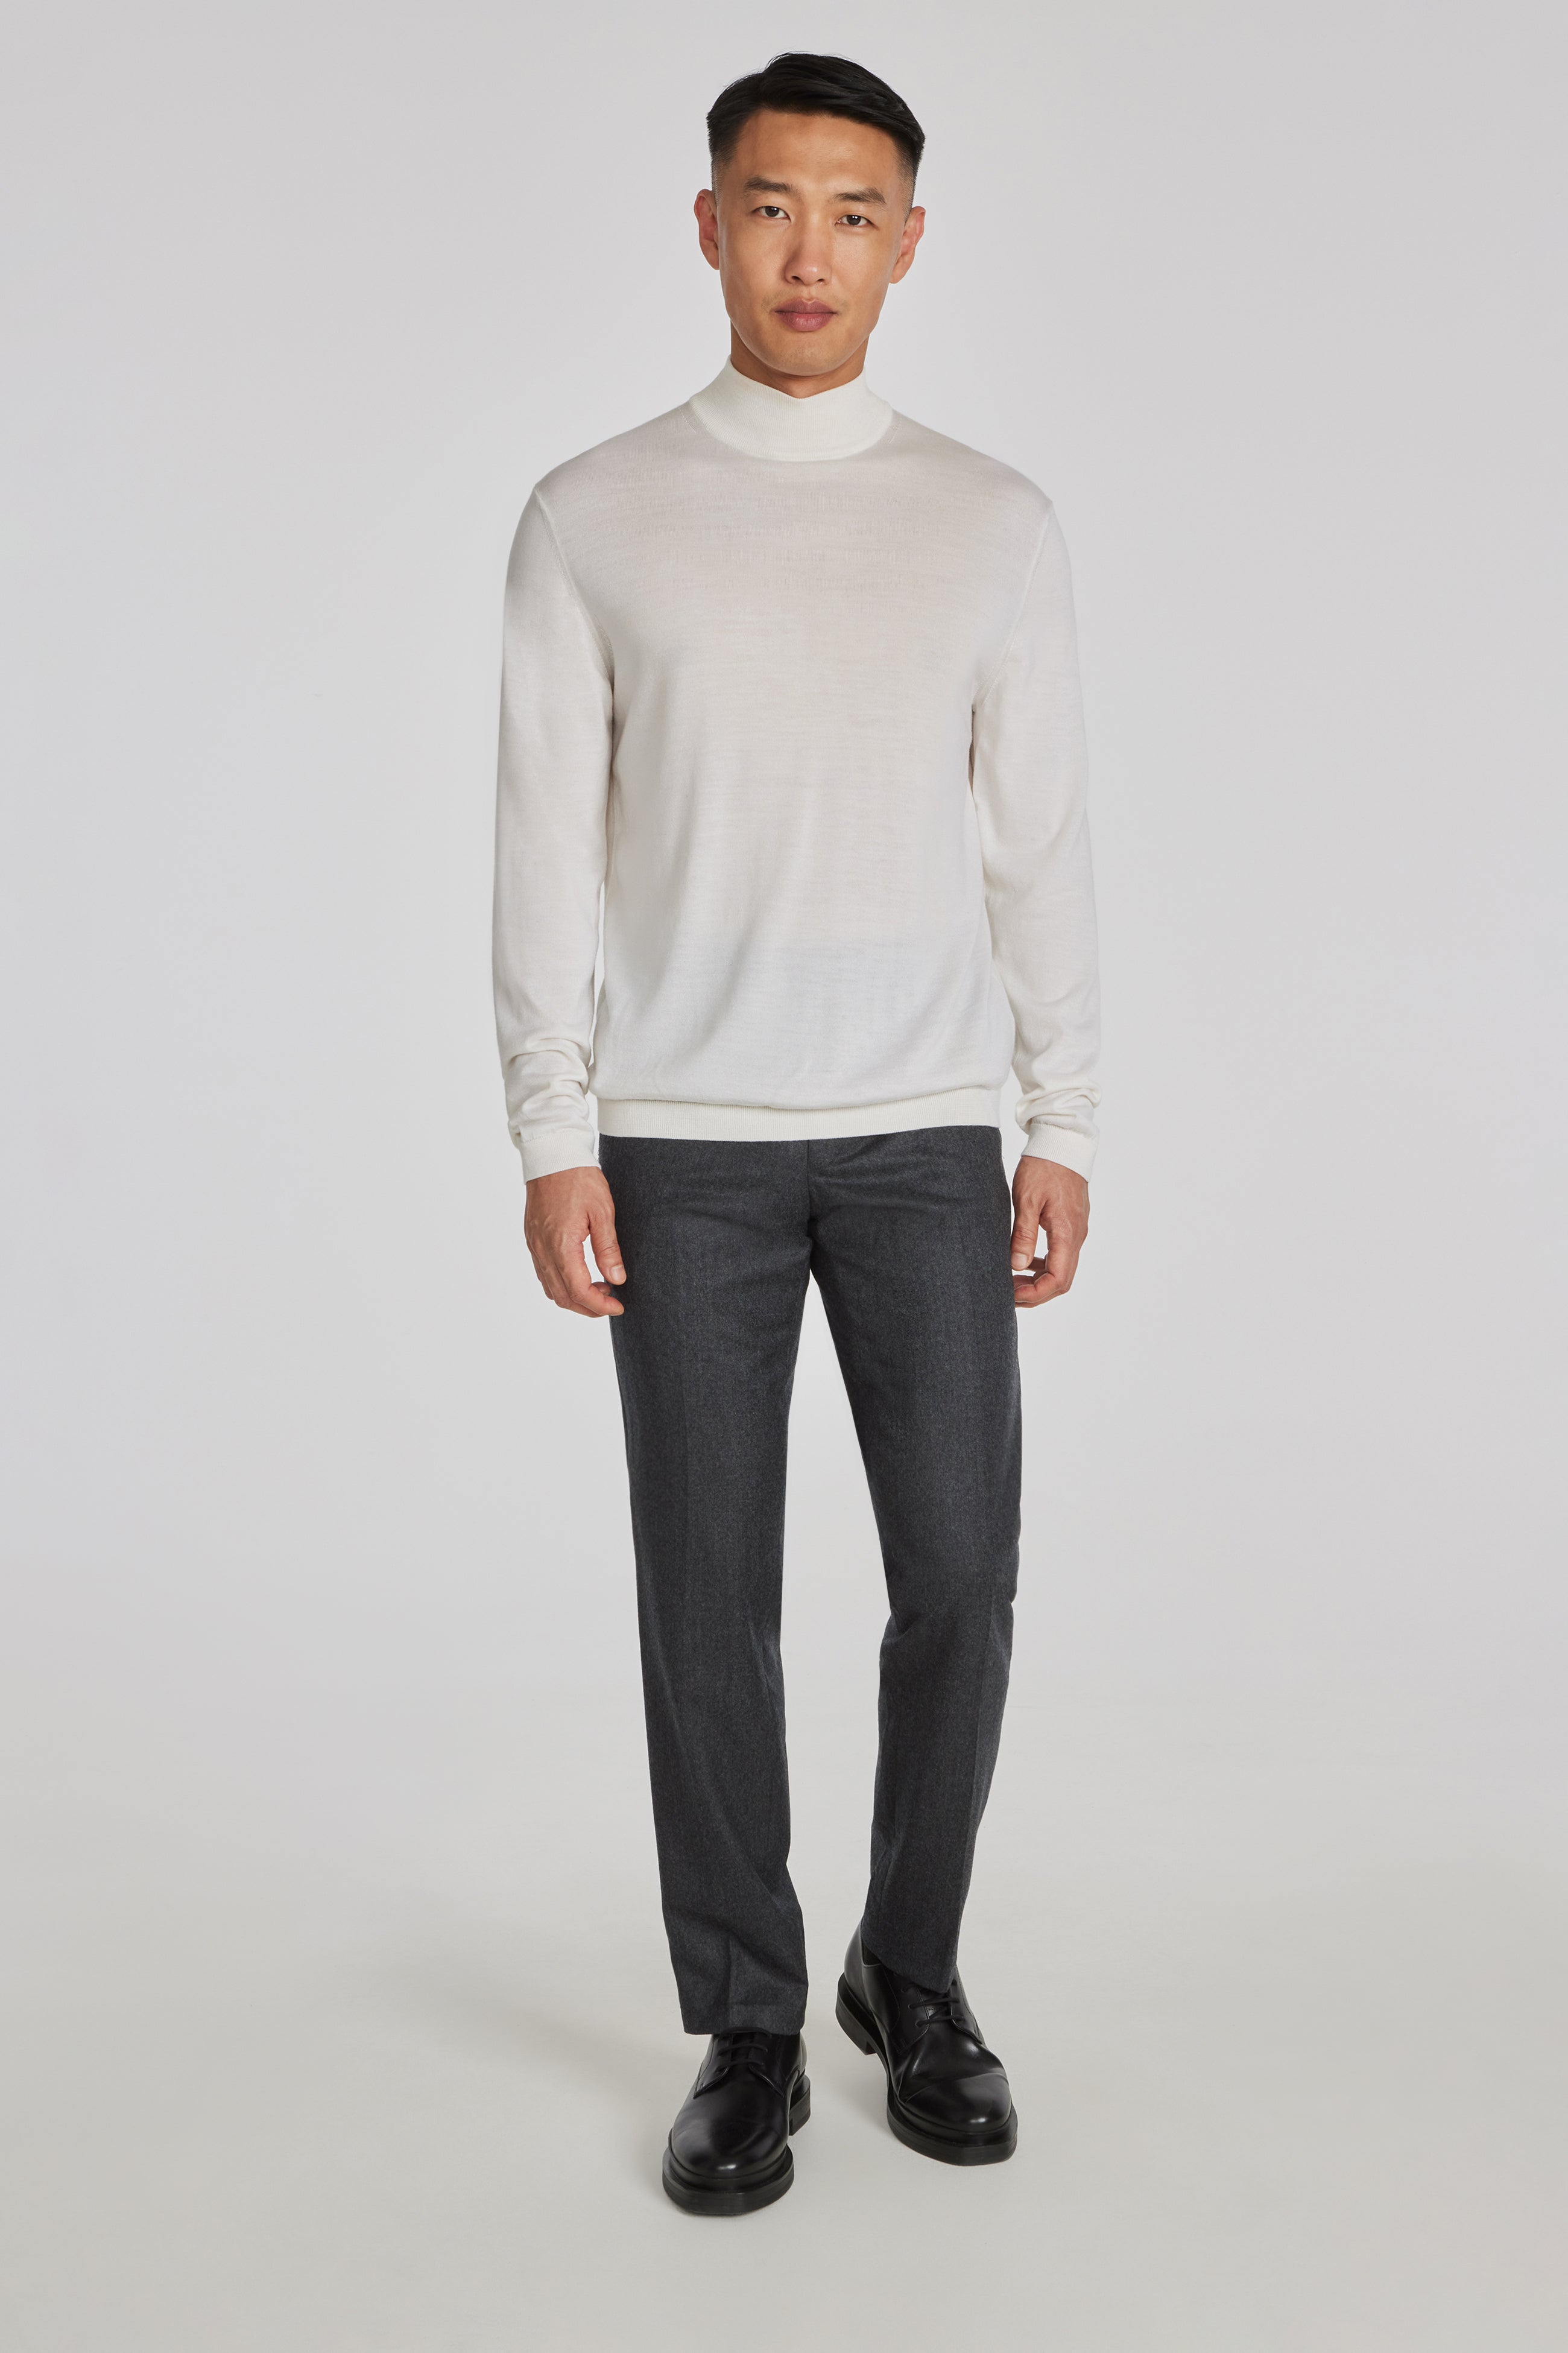 Beaudry Ecru Wool, Silk and Cashmere Mock Neck Sweater